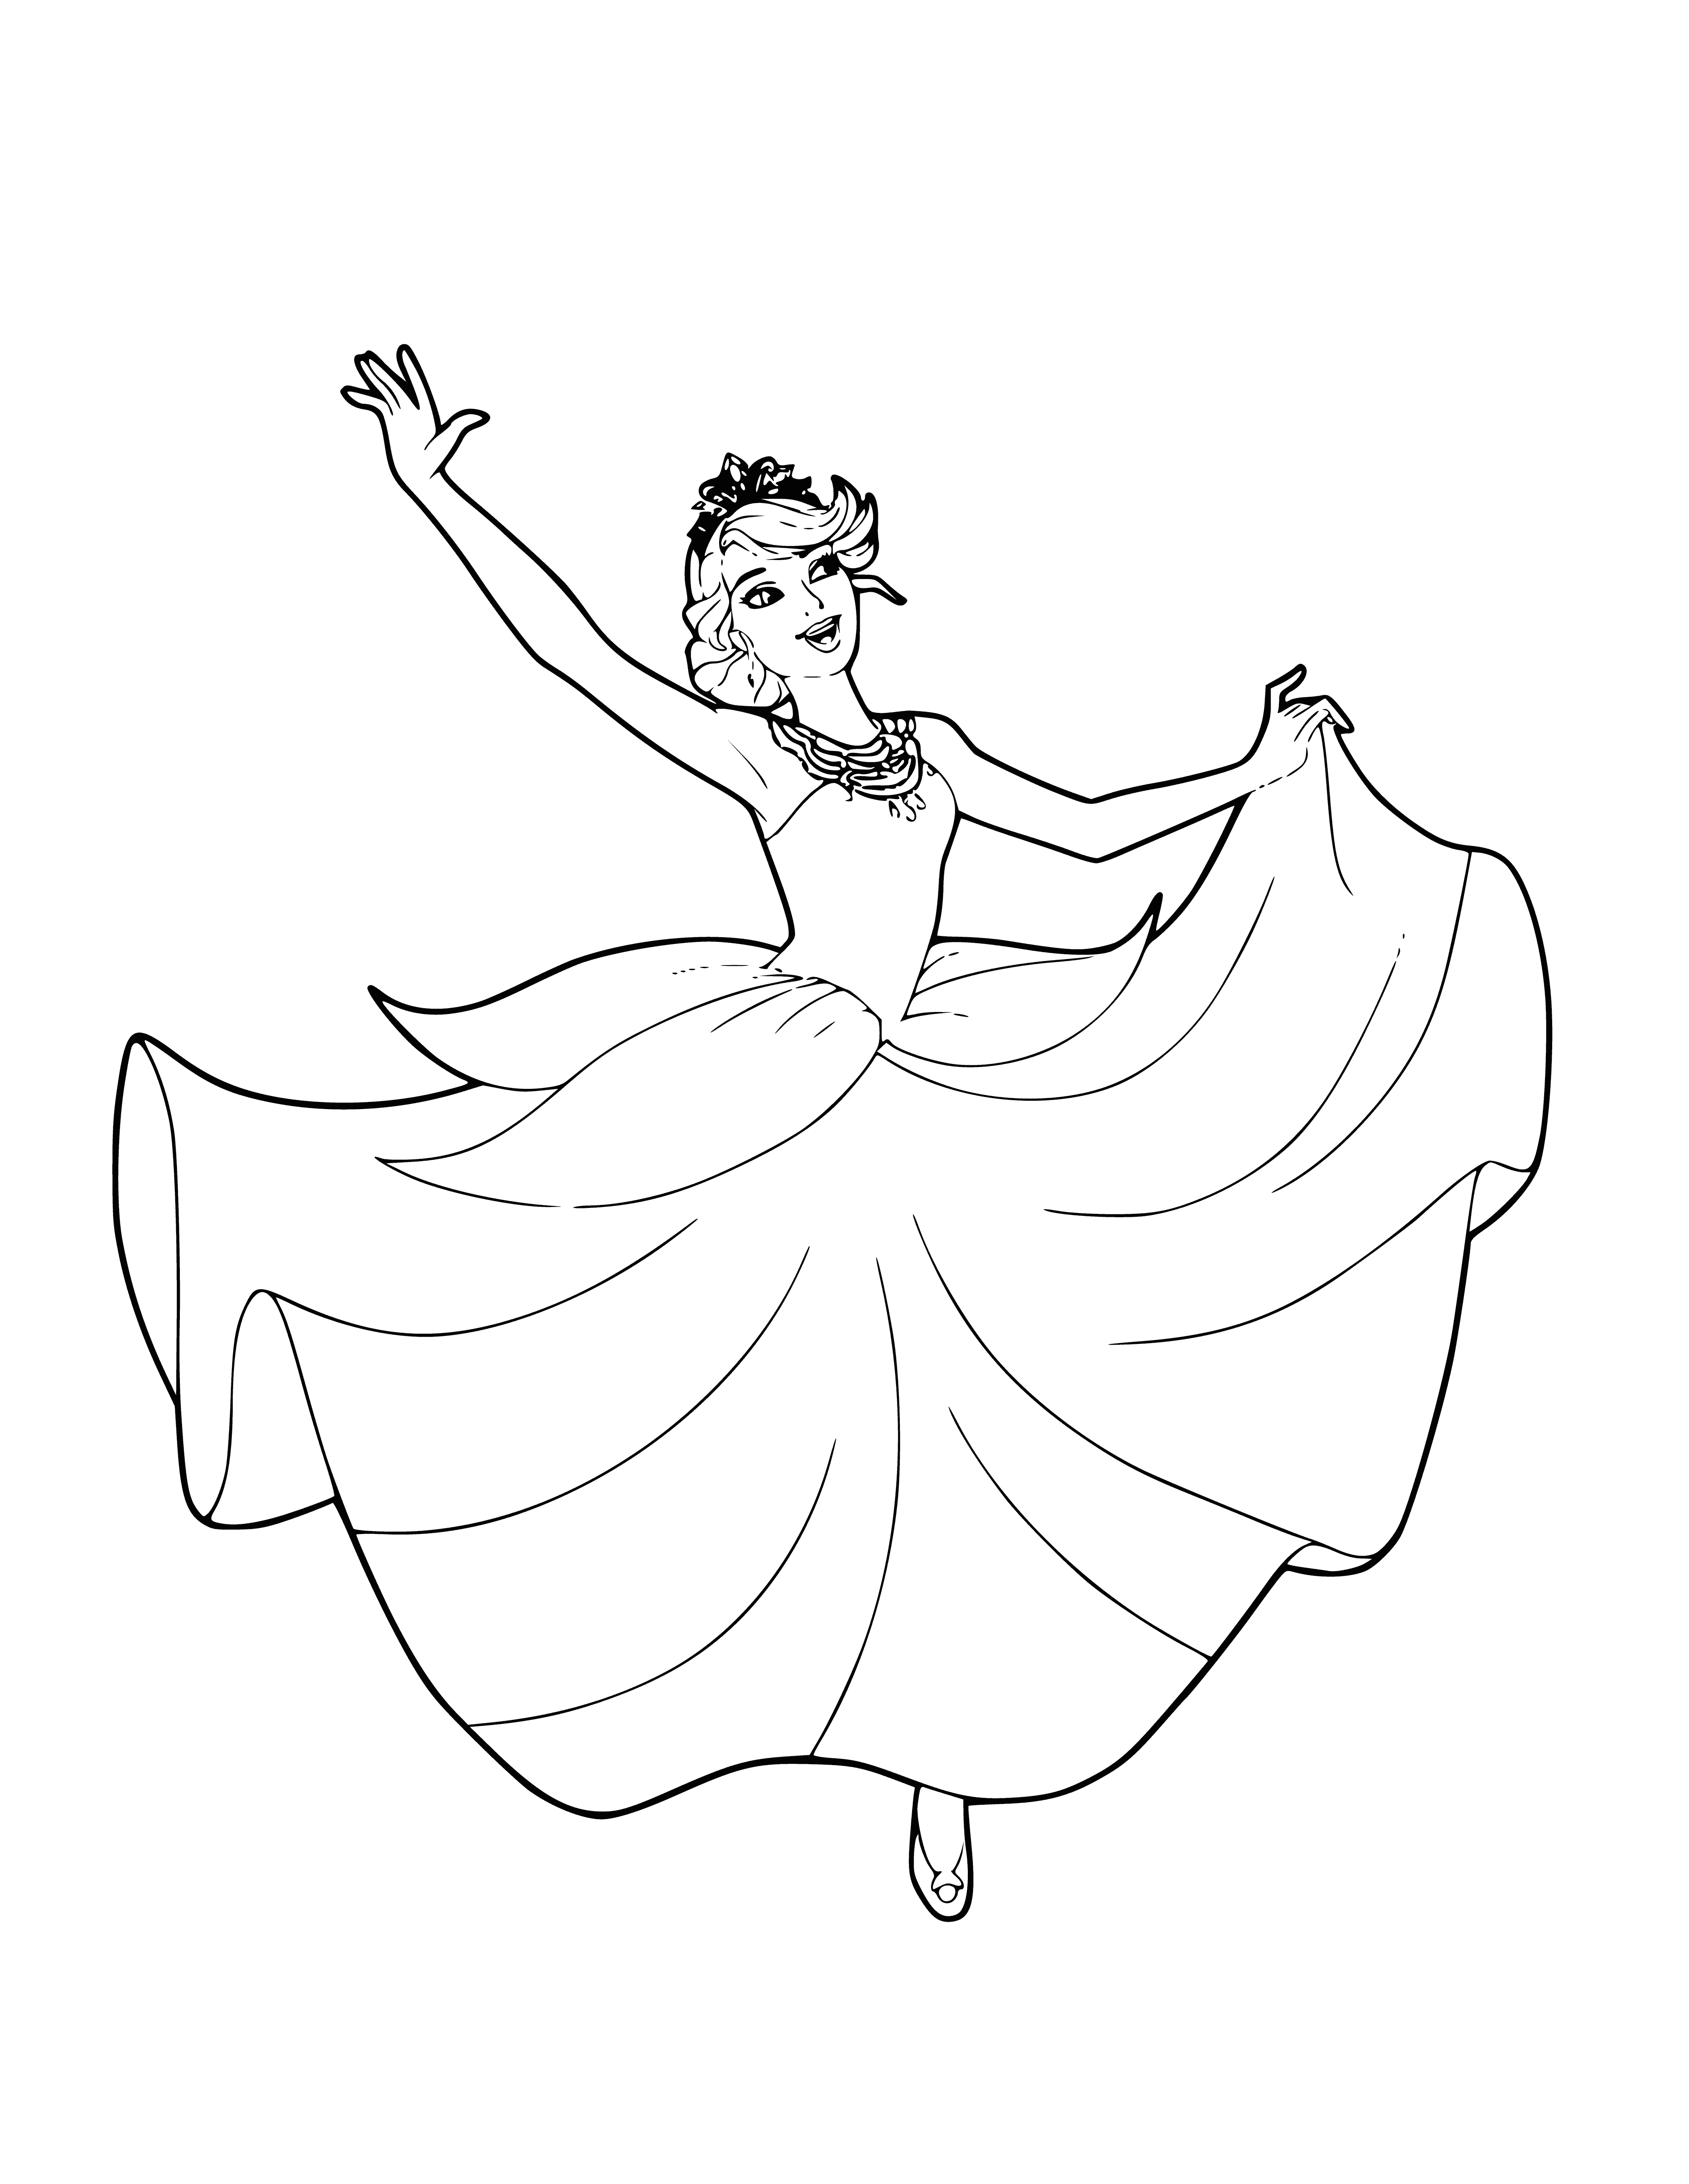 coloring page: Barbie in a fancy pink dress with an updo, wearing pink shoes and tiara - the perfect princess! #BarbiePrincess #Pink